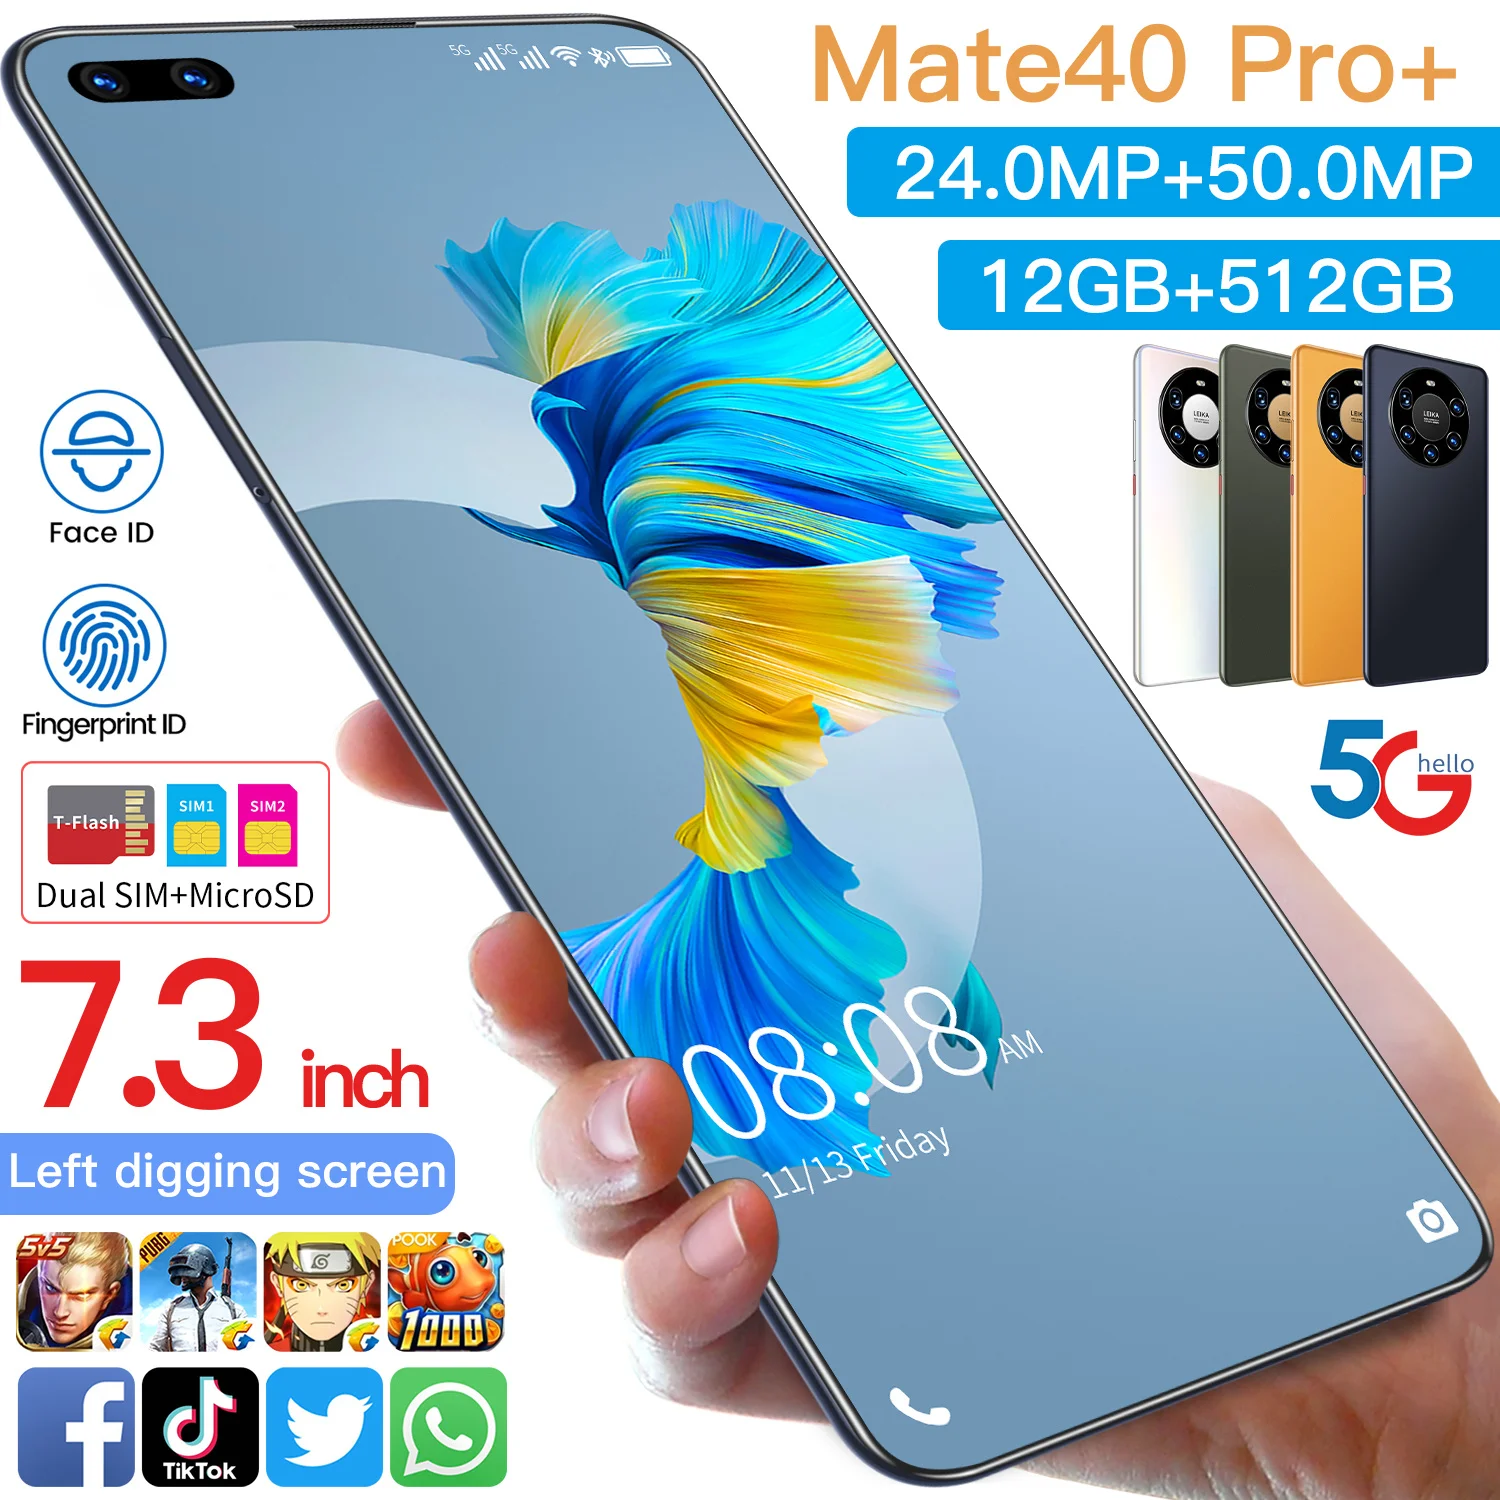 

Mate40 pro+ 7.3 inch 24MP+50MP 12GB+512GB Mobile Android Smartphone 10 Core Full screen Cell Phones Large Capacity Battery, Black white blue